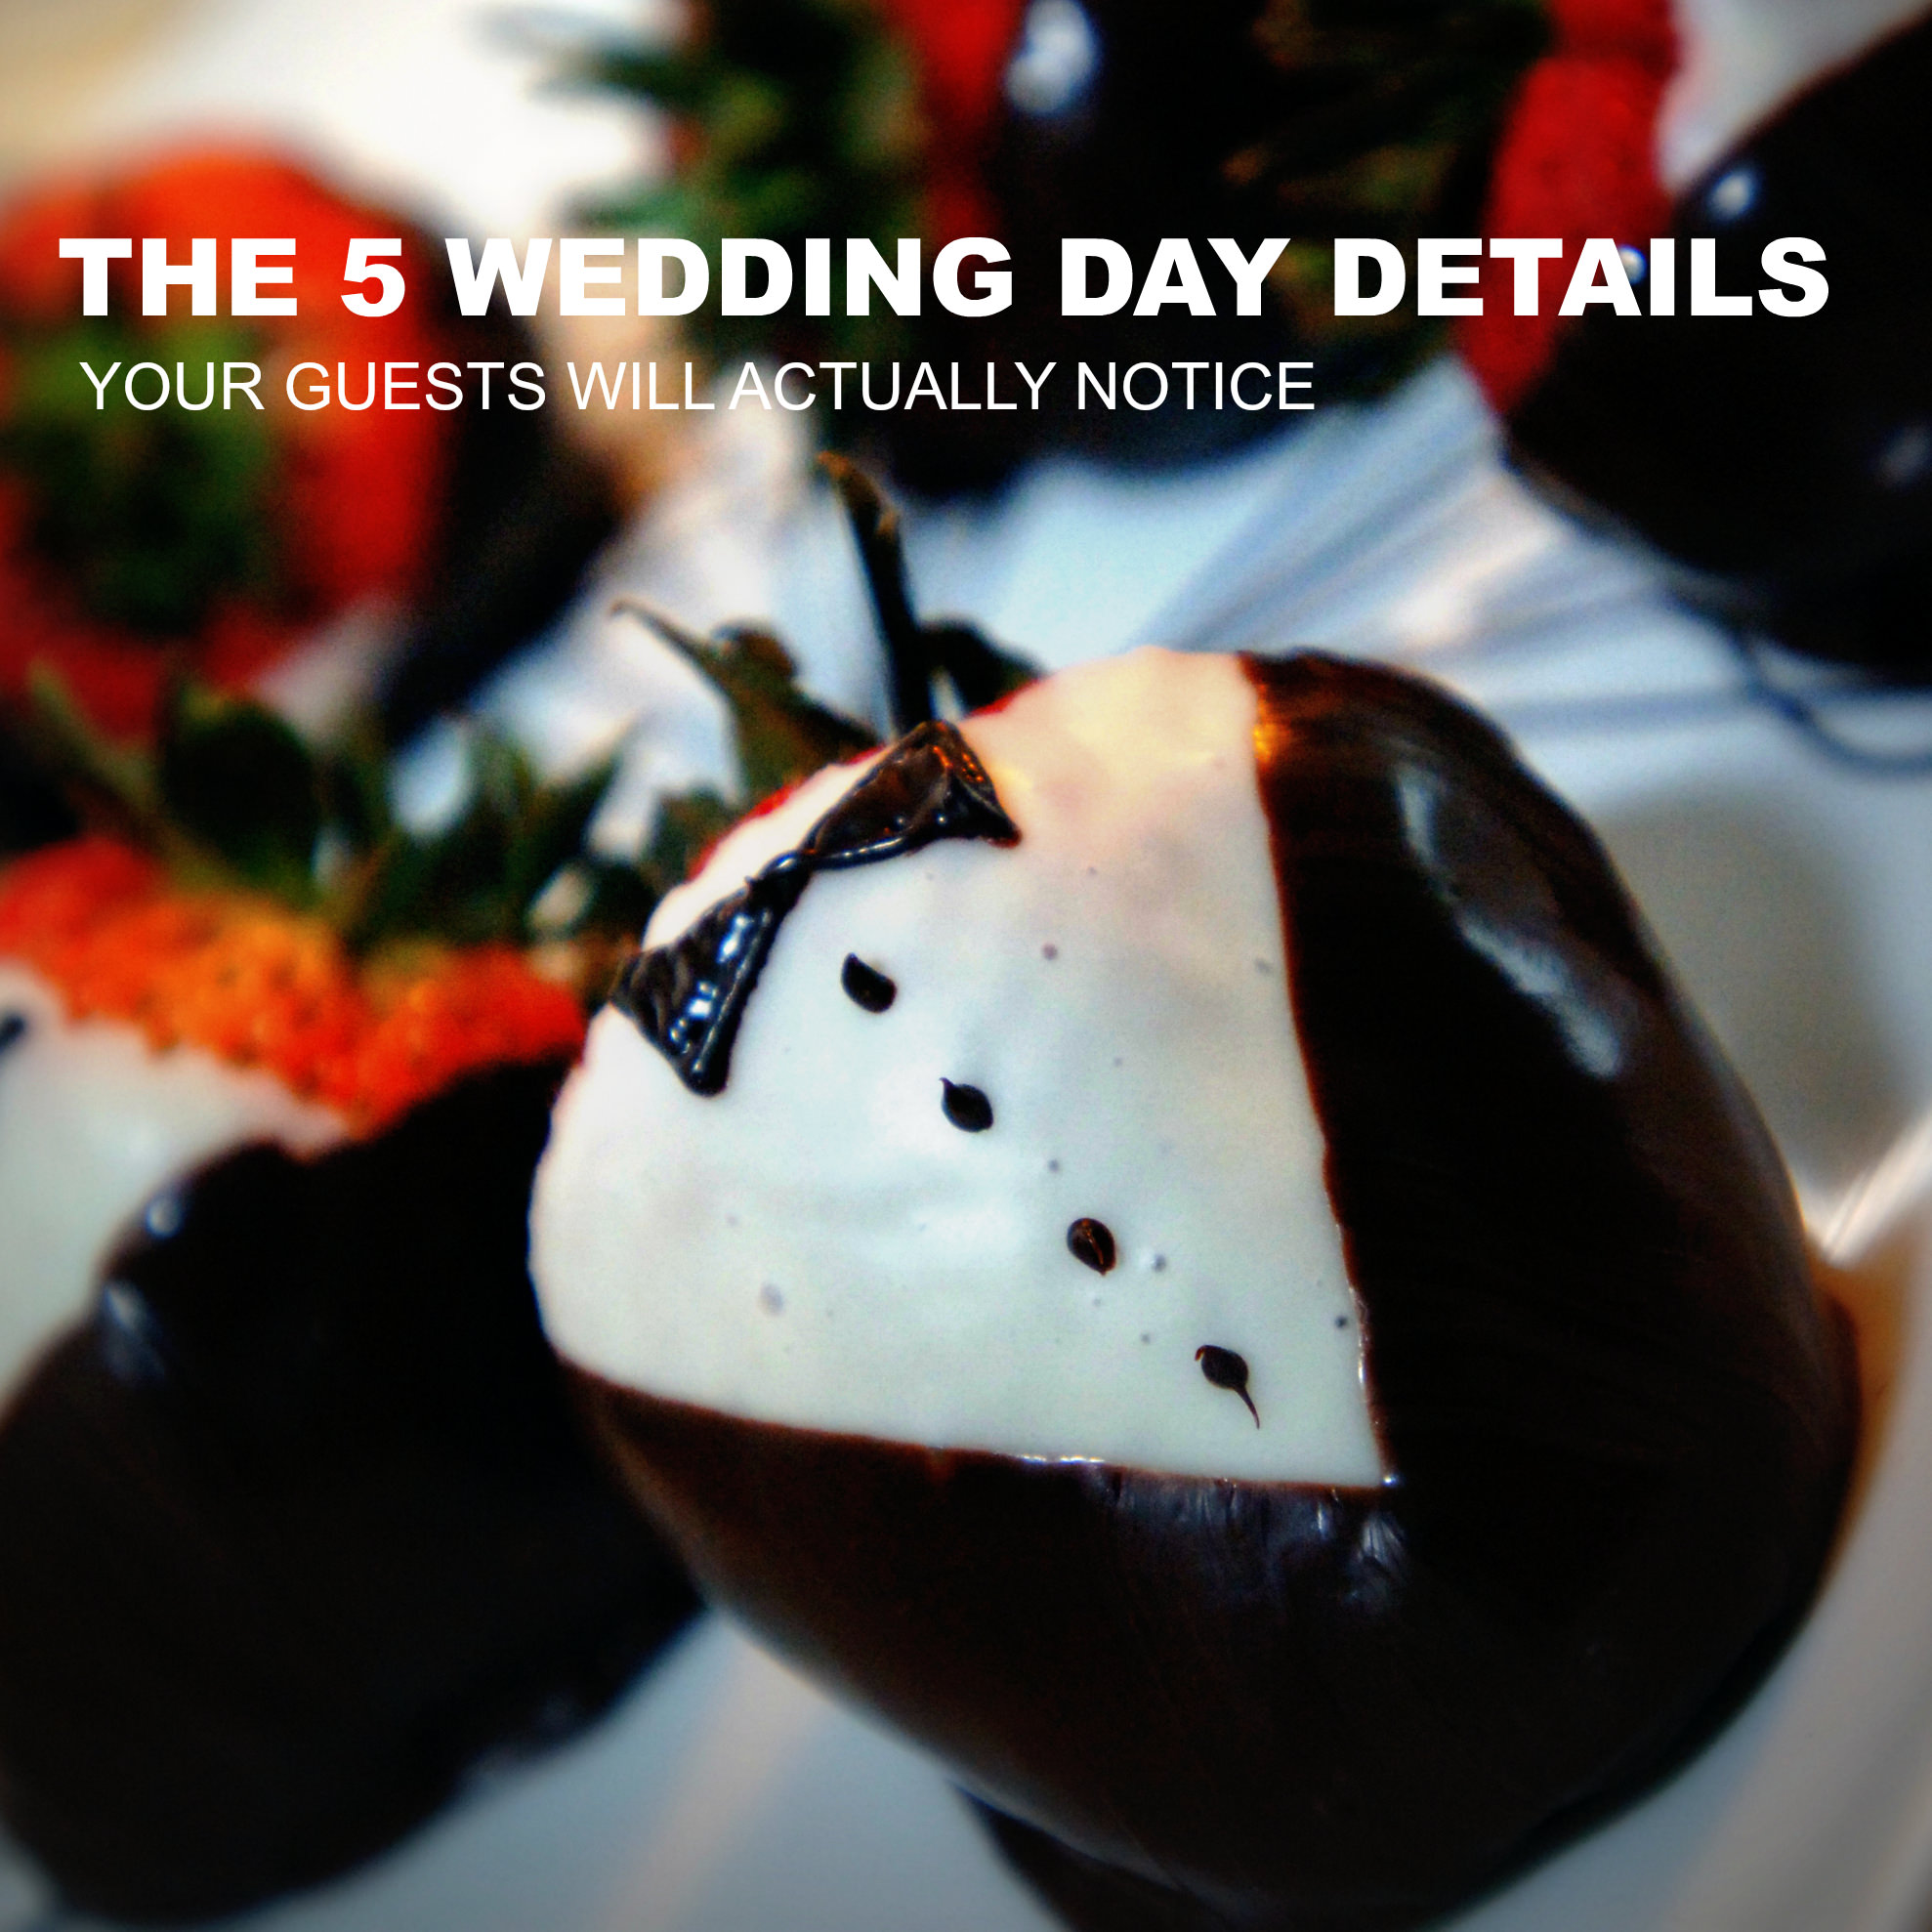 5 WEDDING DAY DETAILS YOUR GUESTS WILL NOTICE. HOWERTON+WOOTEN EVENTS.